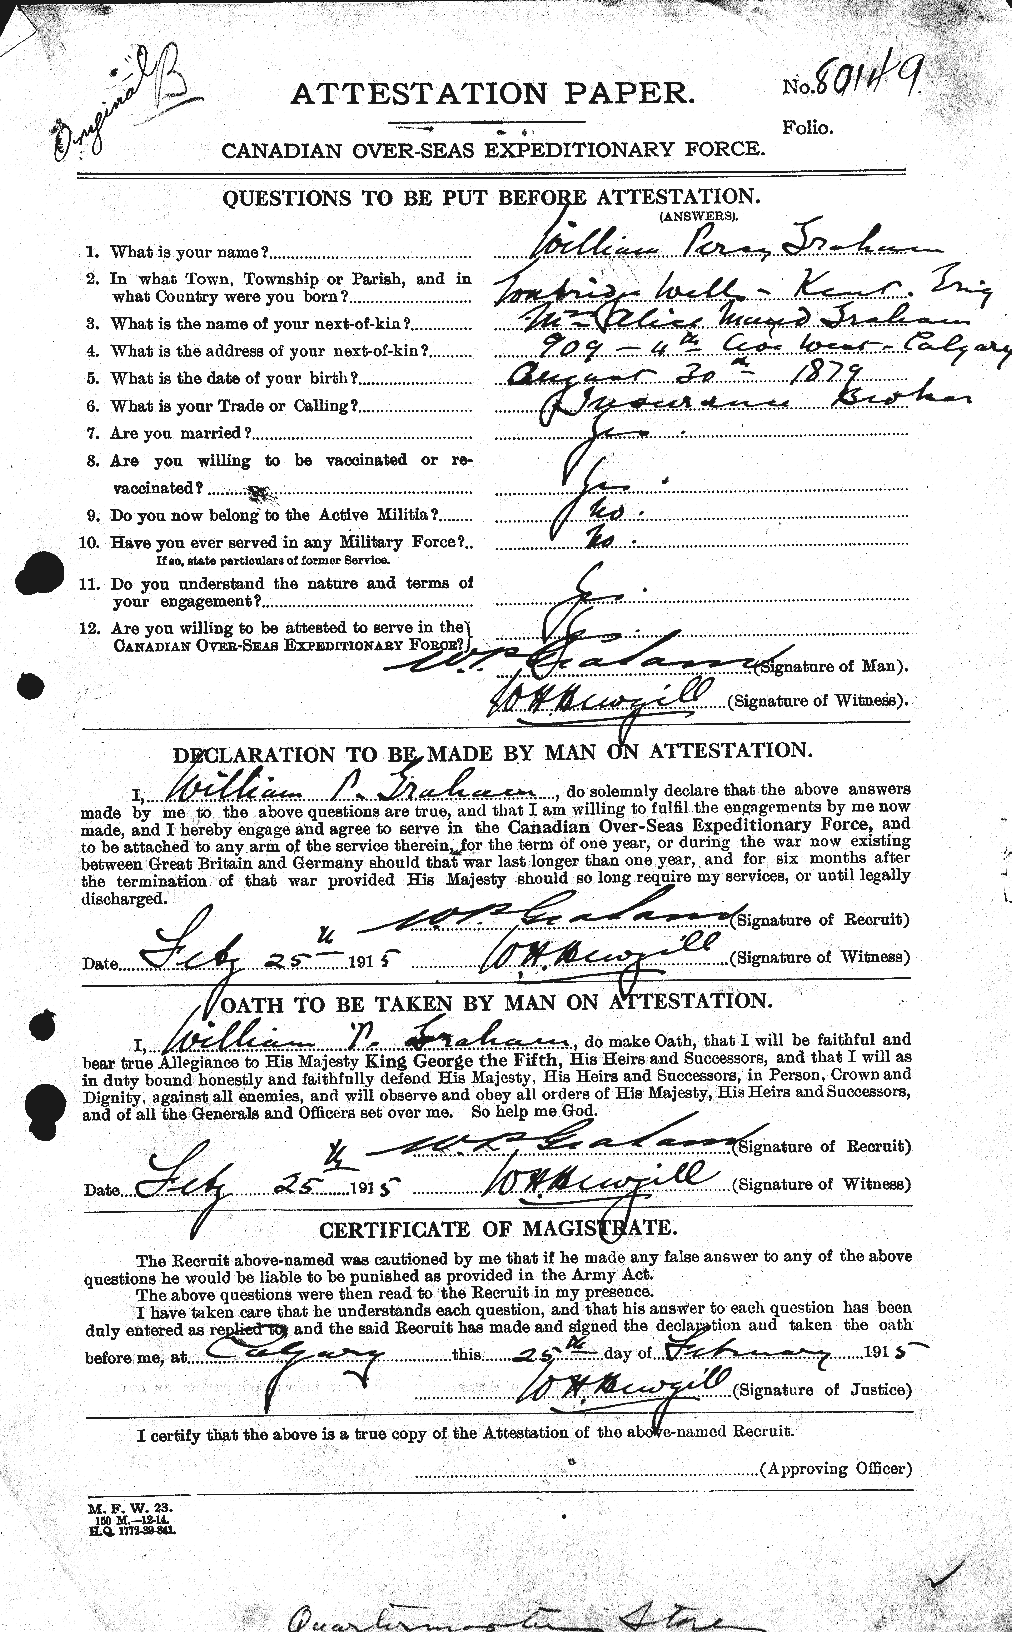 Personnel Records of the First World War - CEF 358031a